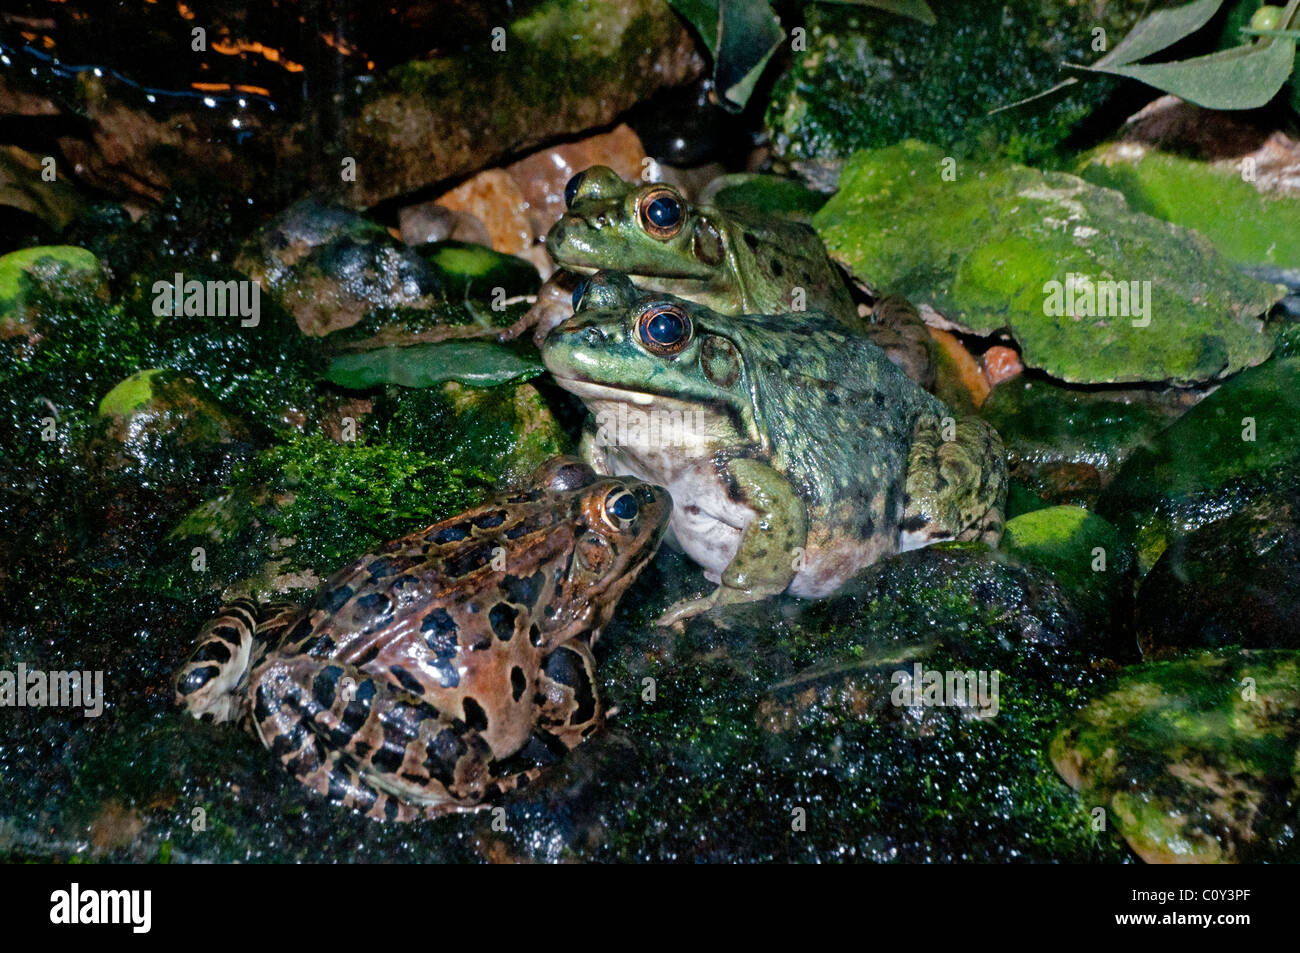 Two Green Frogs and a Leopard Frog. Stock Photo